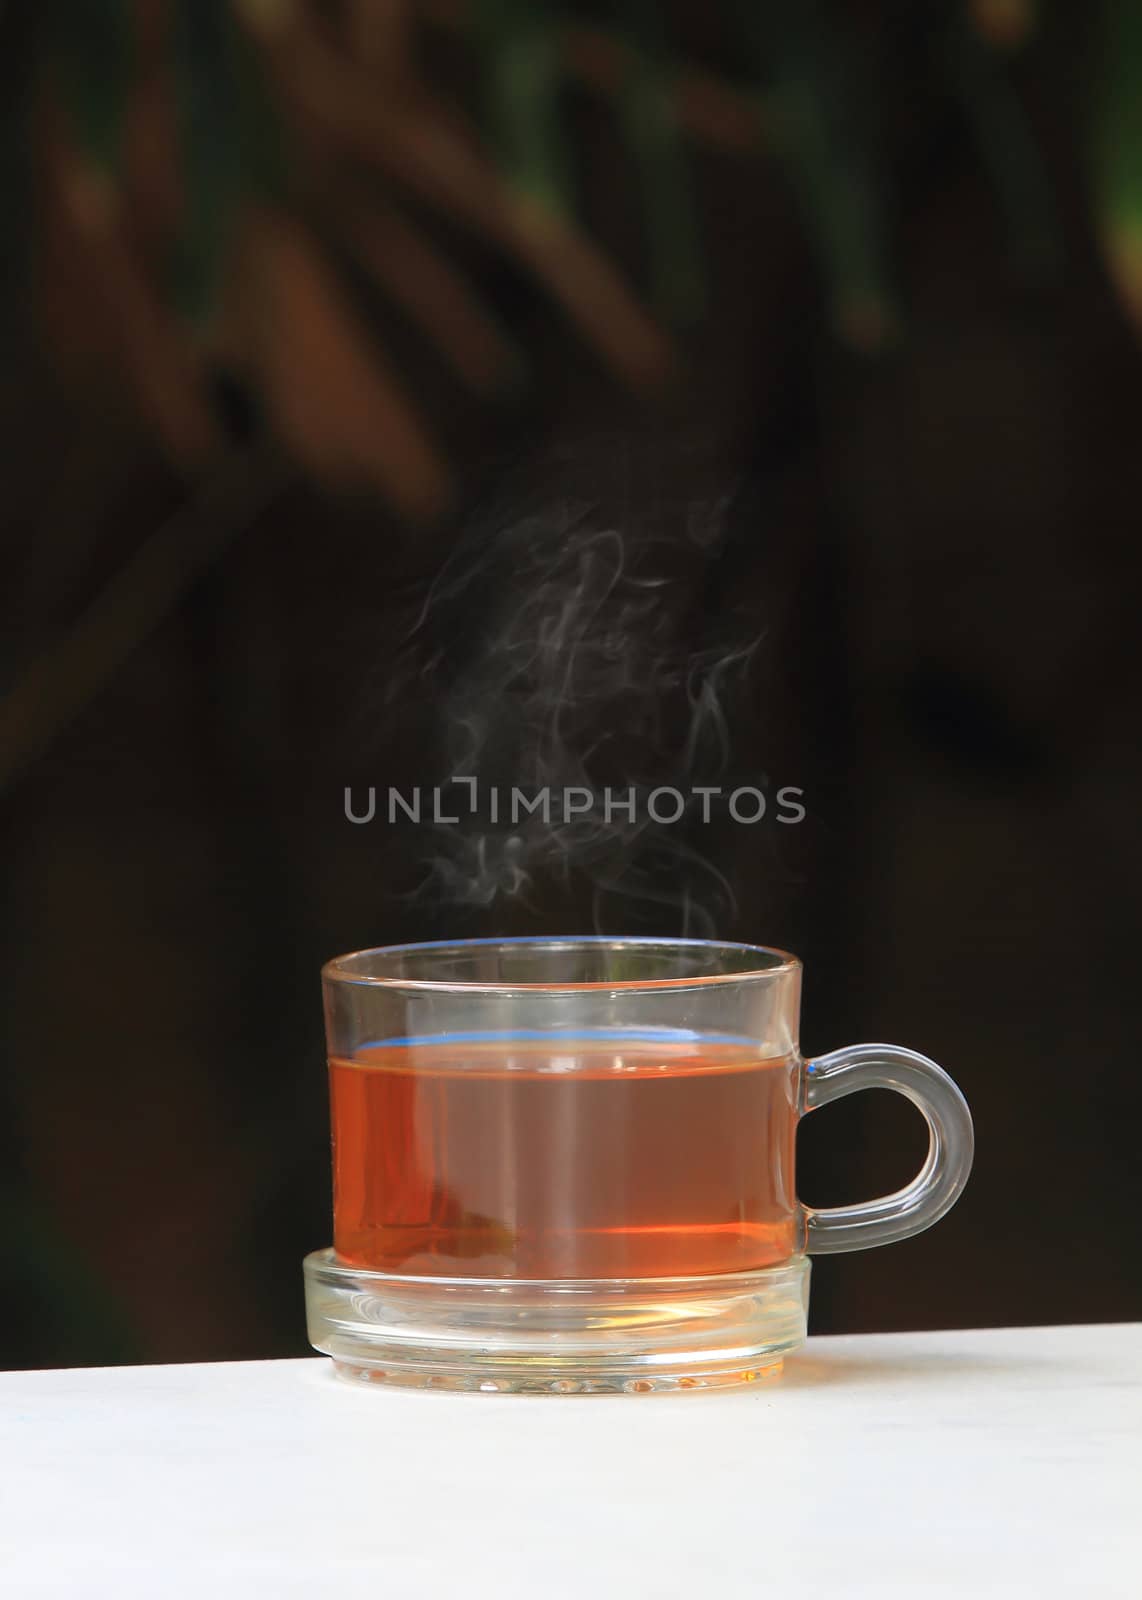 A glass bowl with hot Chinese tea by rufous